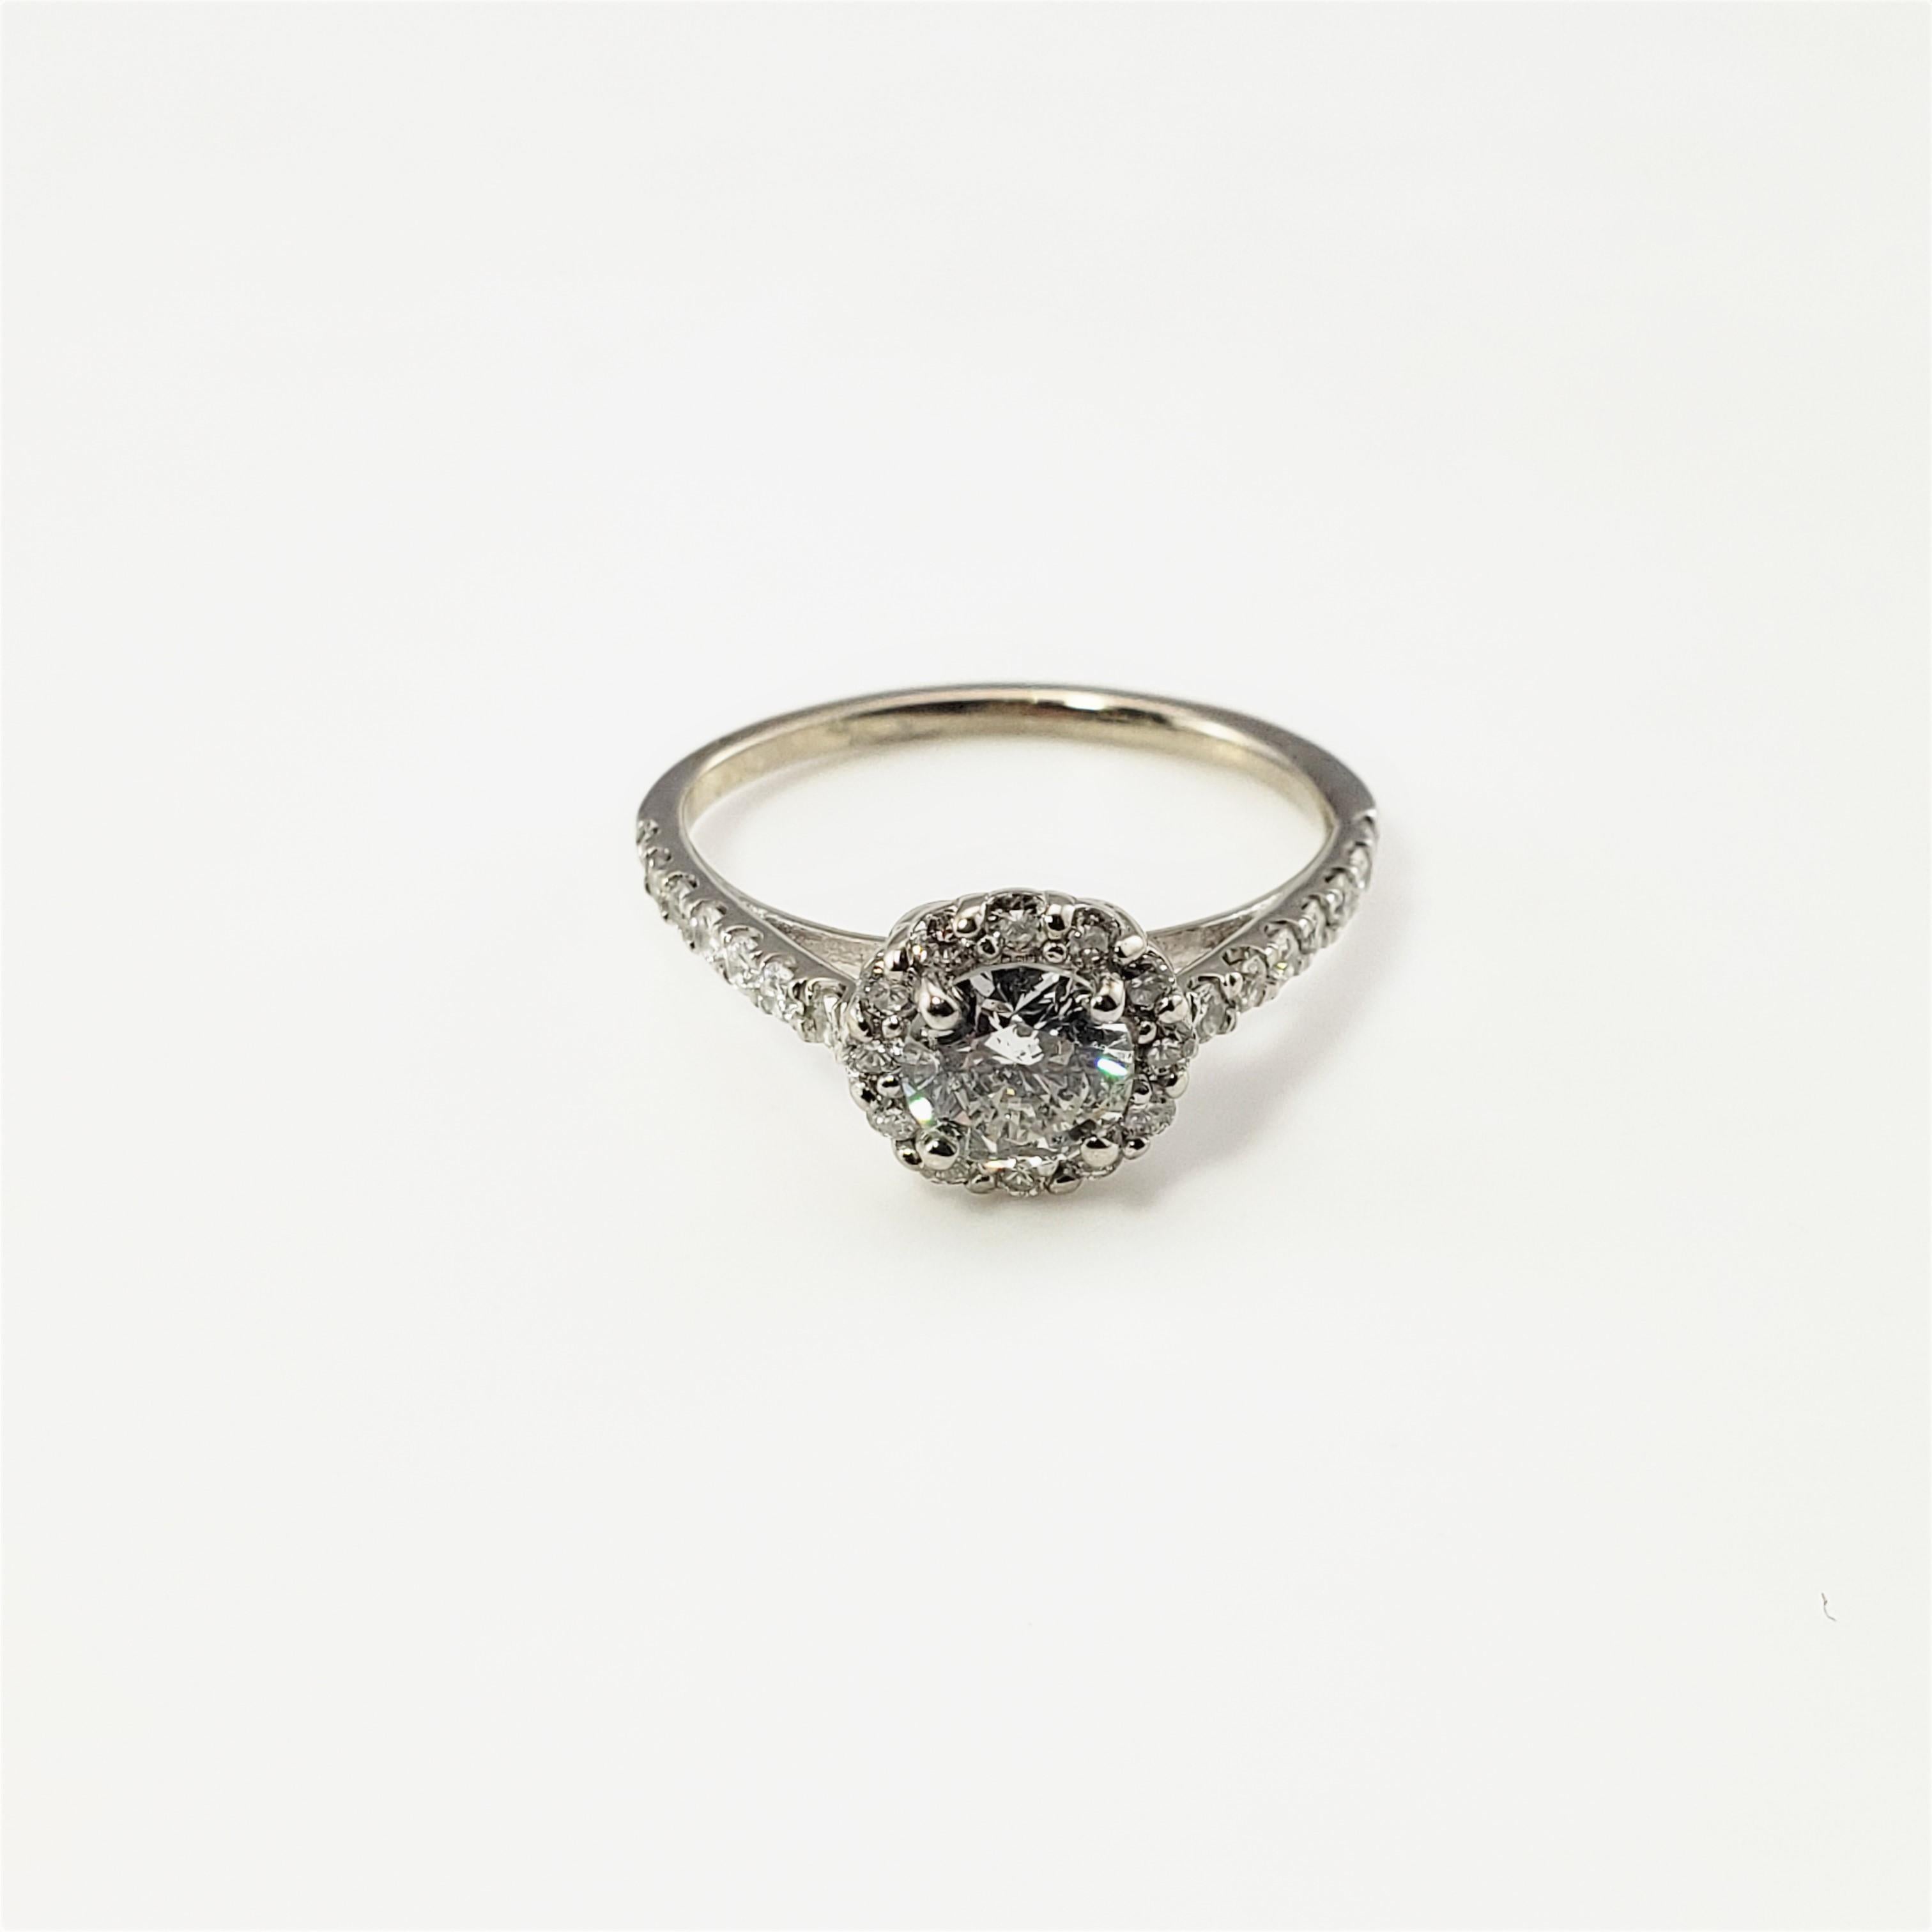 14 Karat White Gold Diamond Engagement Ring Size 5.5 GAI Certified-

This sparkling engagement ring features 27 round brilliant cut diamonds (center stone: .57 TCW) set in beautifully detailed 14K white gold.  Top of ring measures 8 mm.  Shank